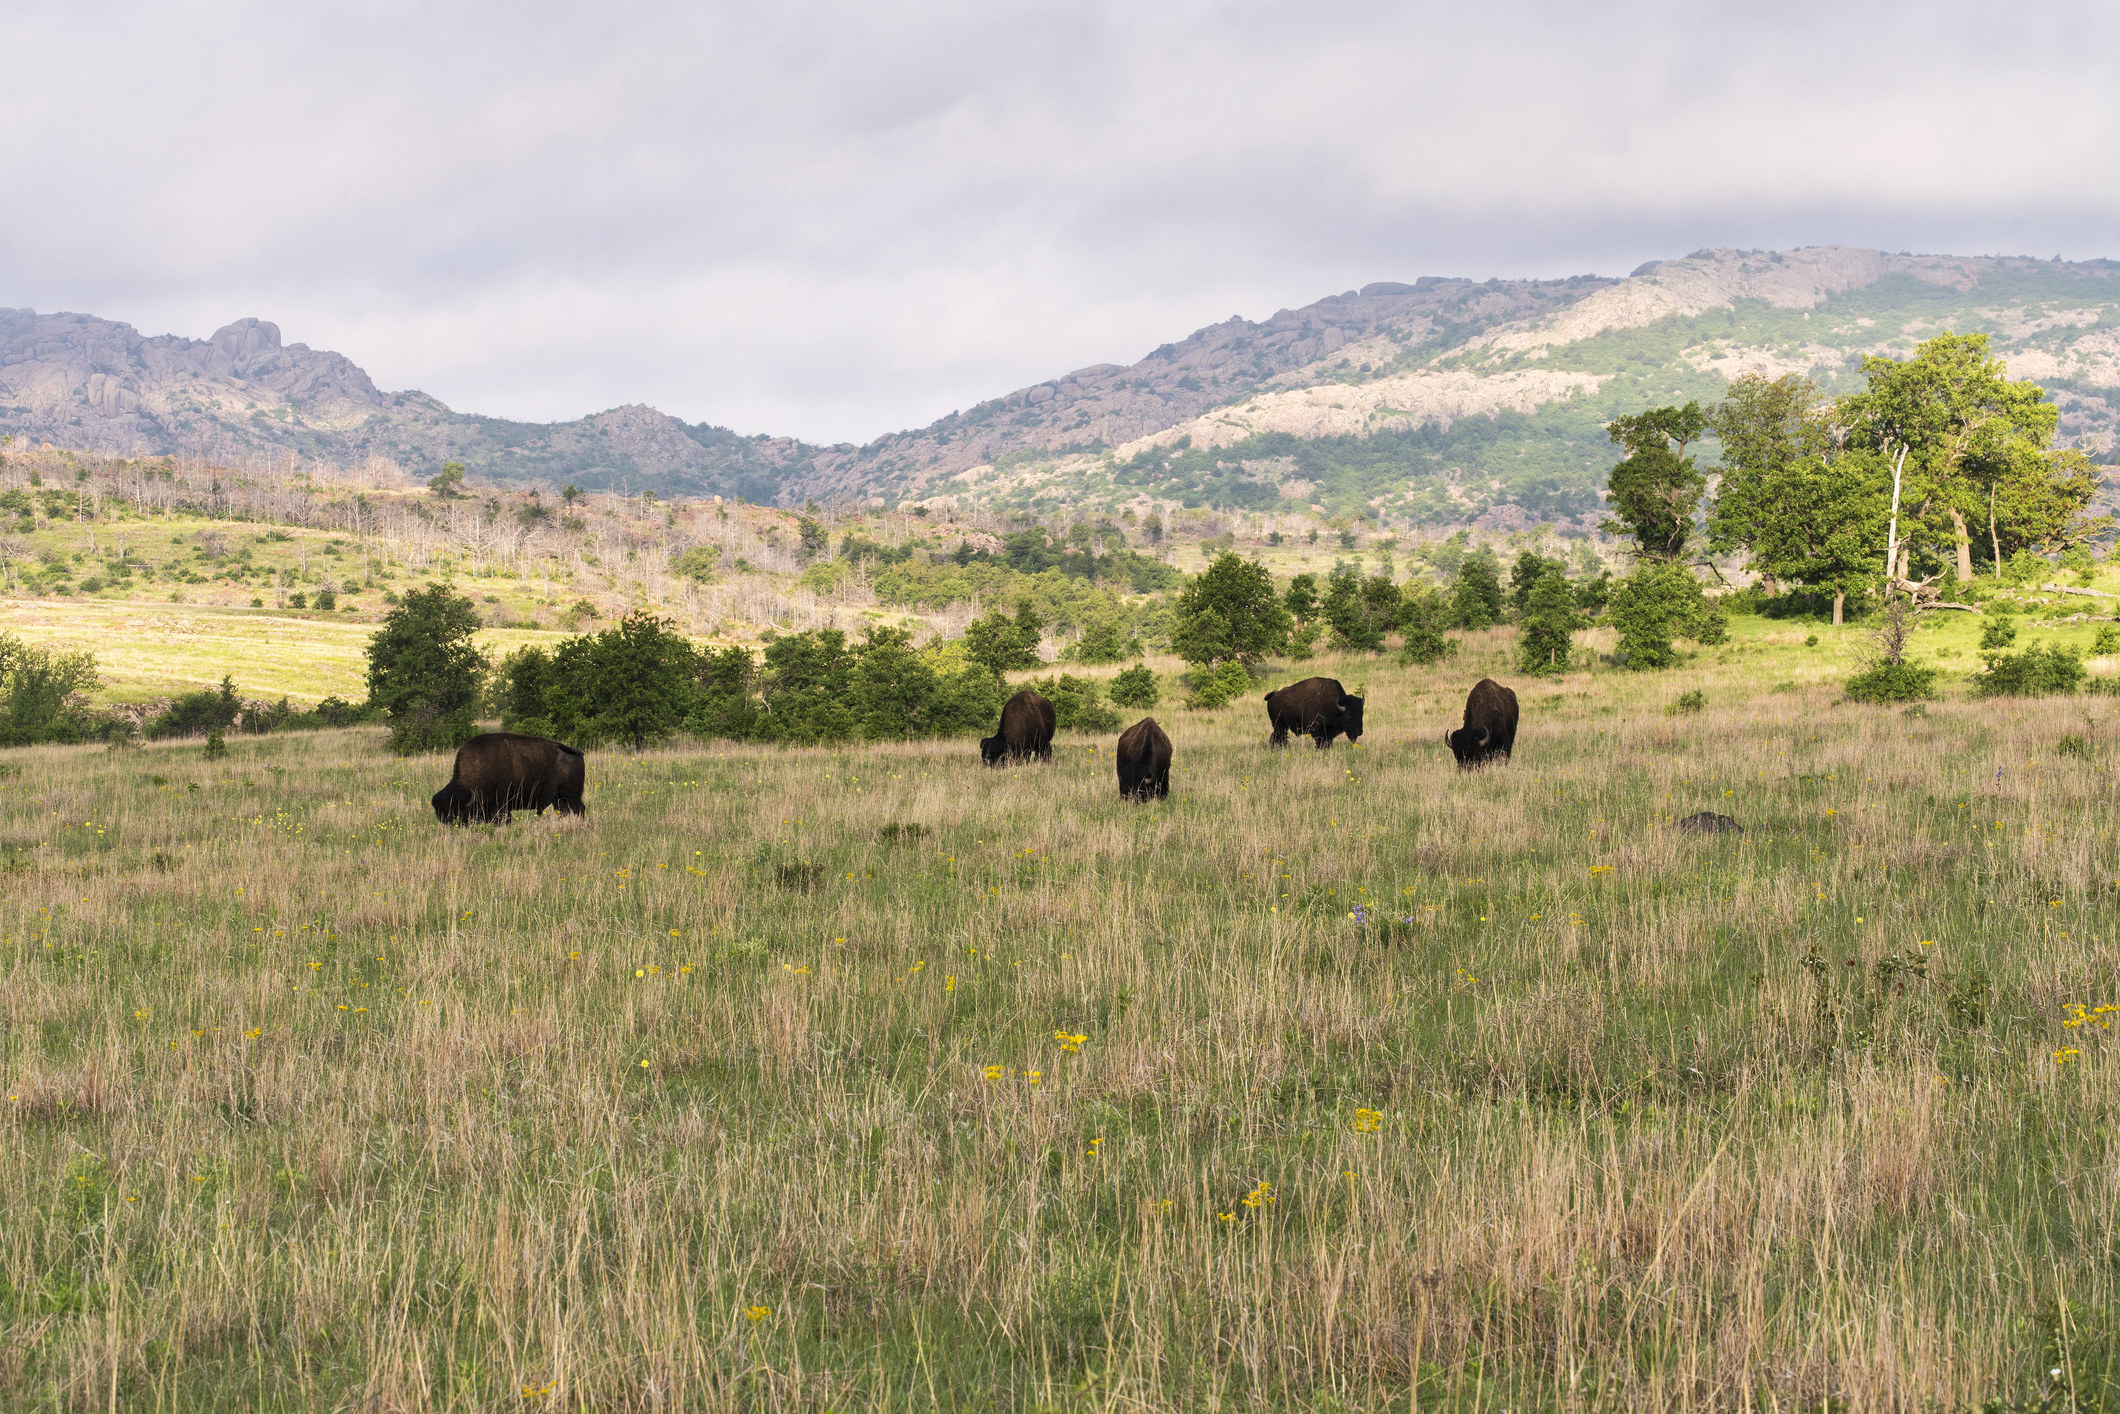 Bison grazing in a field with long grass at the Wichita Mountains National Wildlife Refuge.
